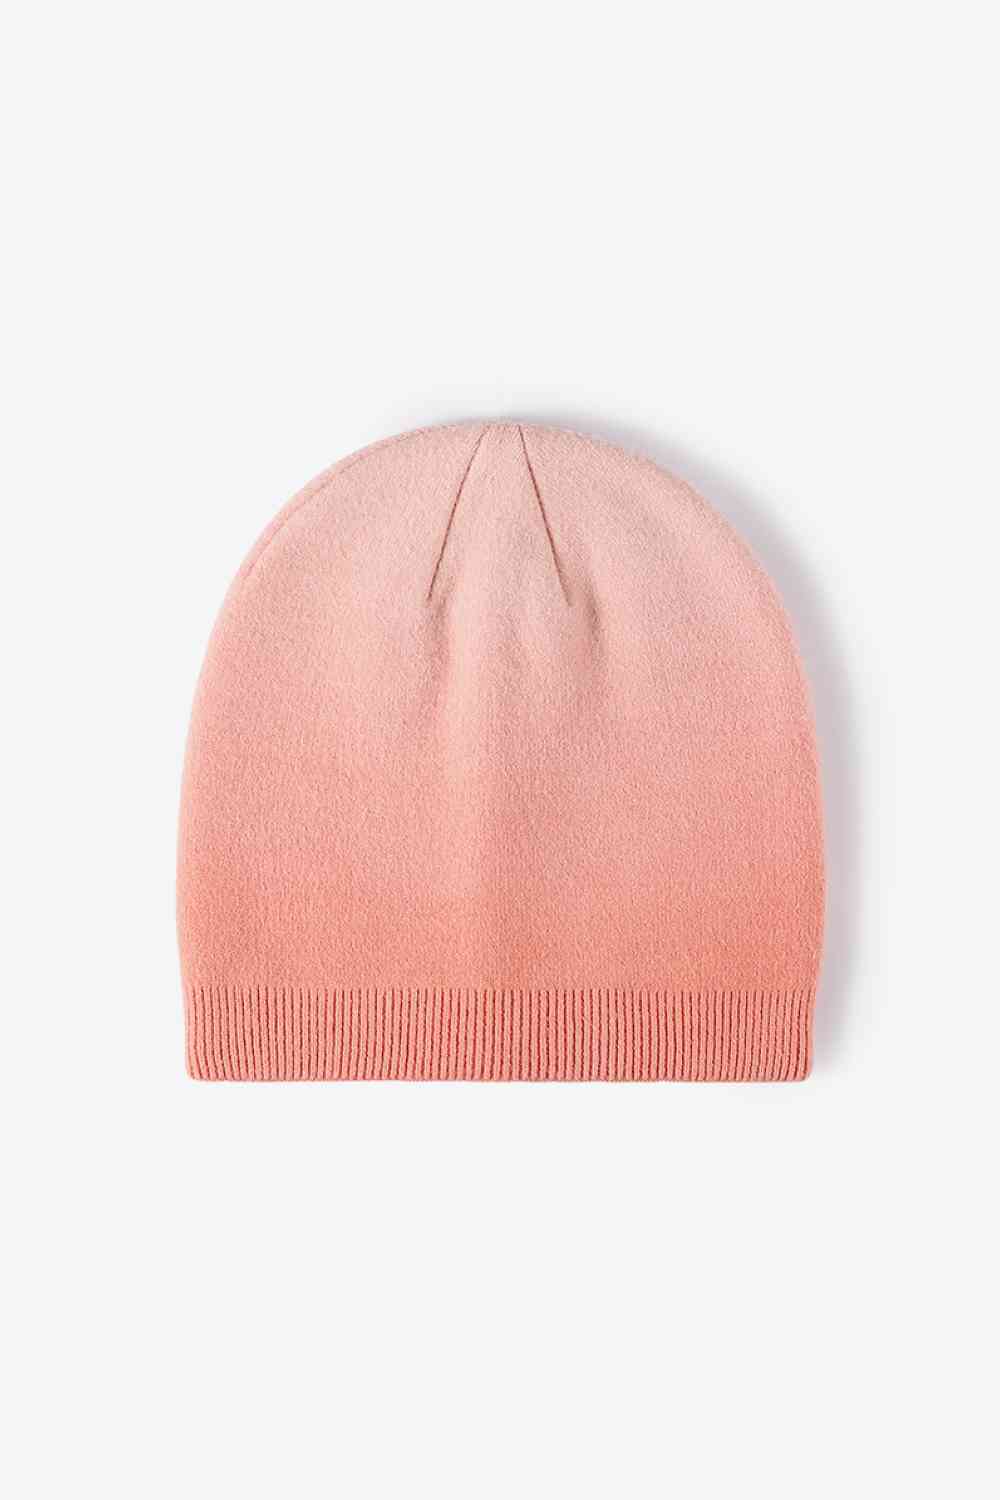 GRADIENT COLOR KNIT BEANIE in Multiple Colors